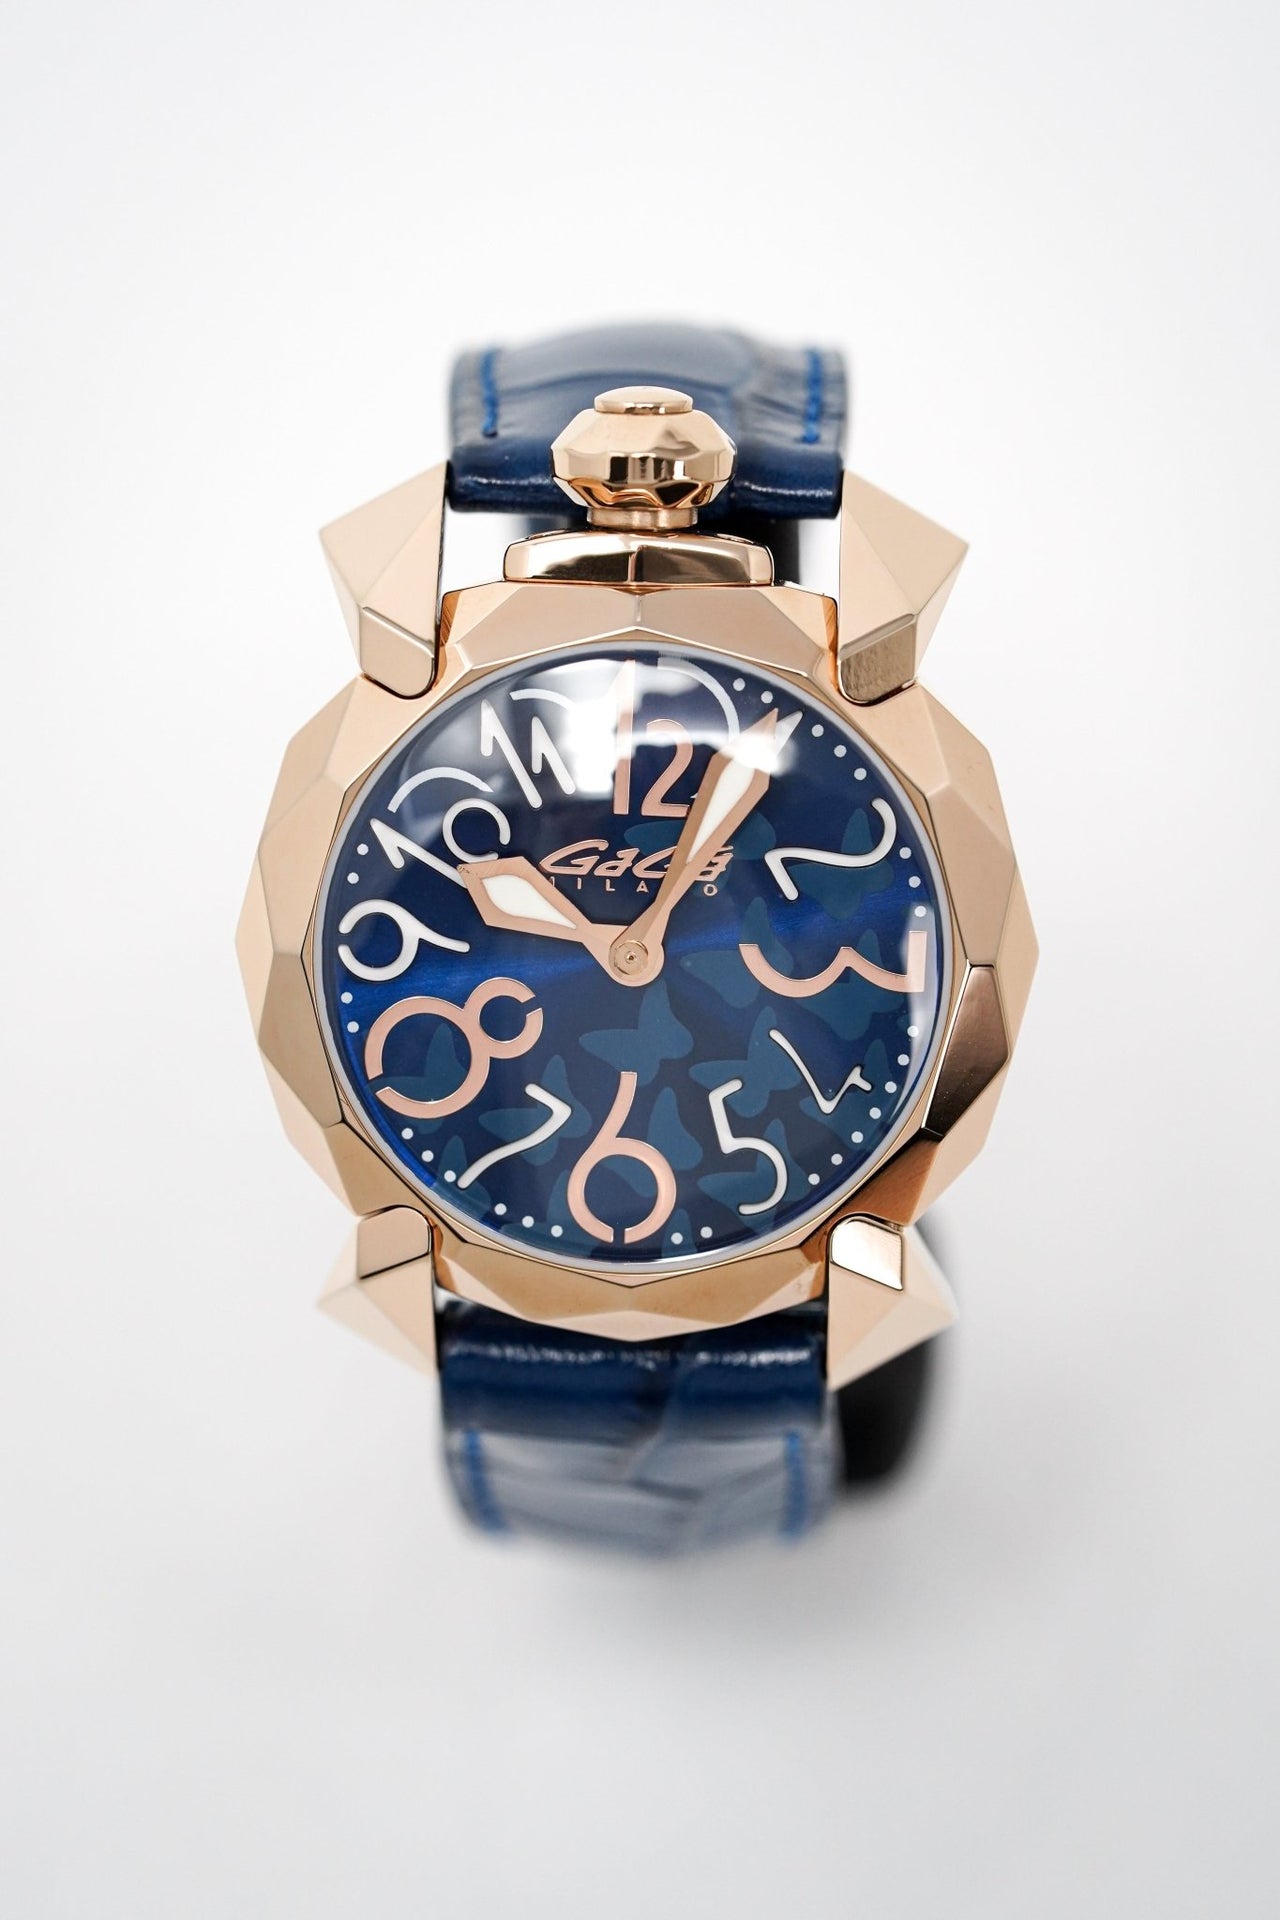 GaGà Milano Reflection Blue Rose Gold - Watches & Crystals